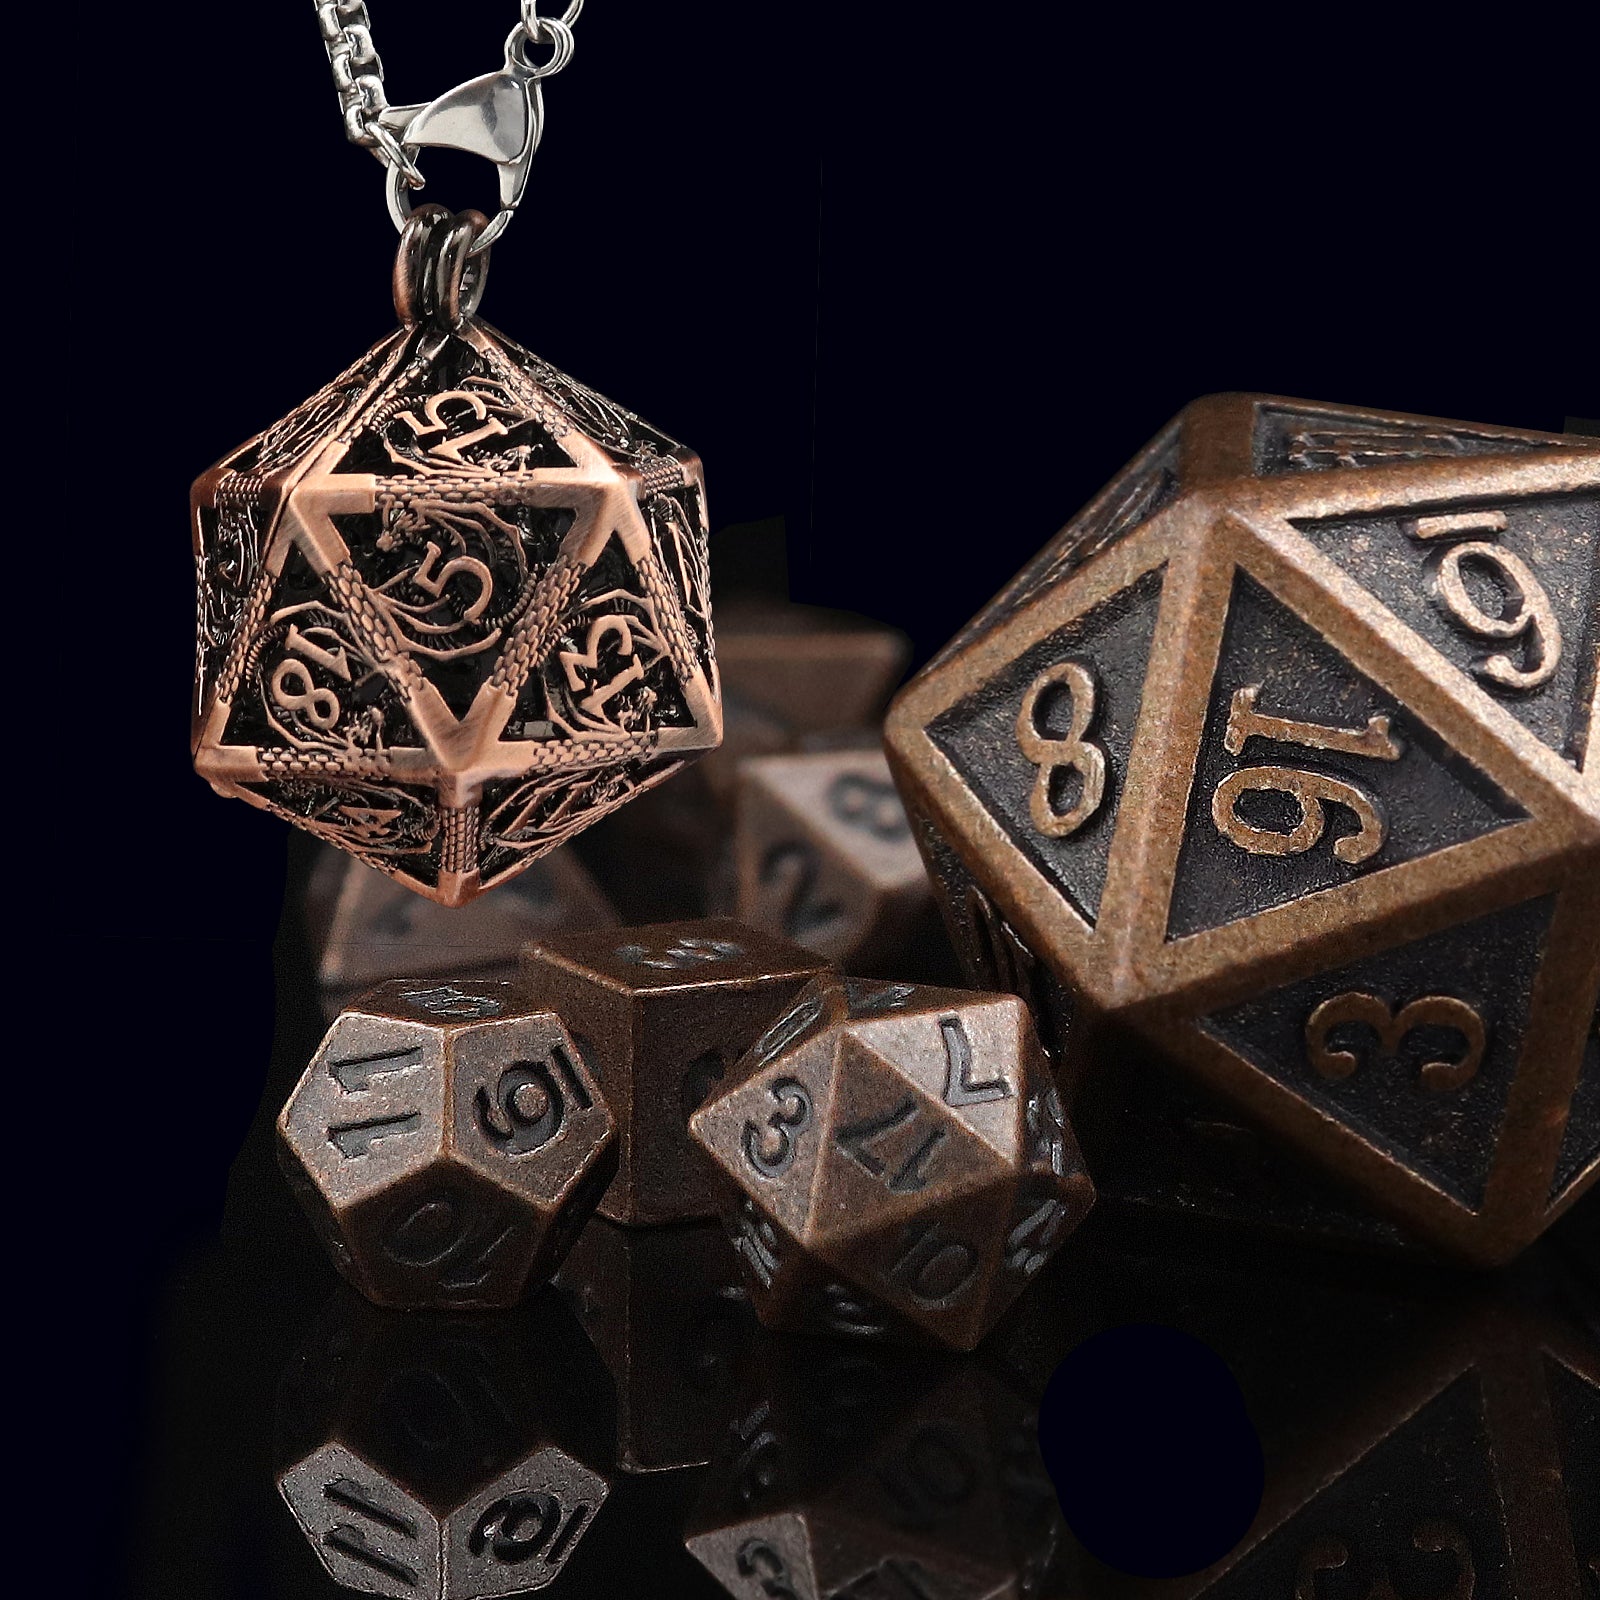 Haxtec Metal Dice, polyhedral dice and accessories for ttrpgs